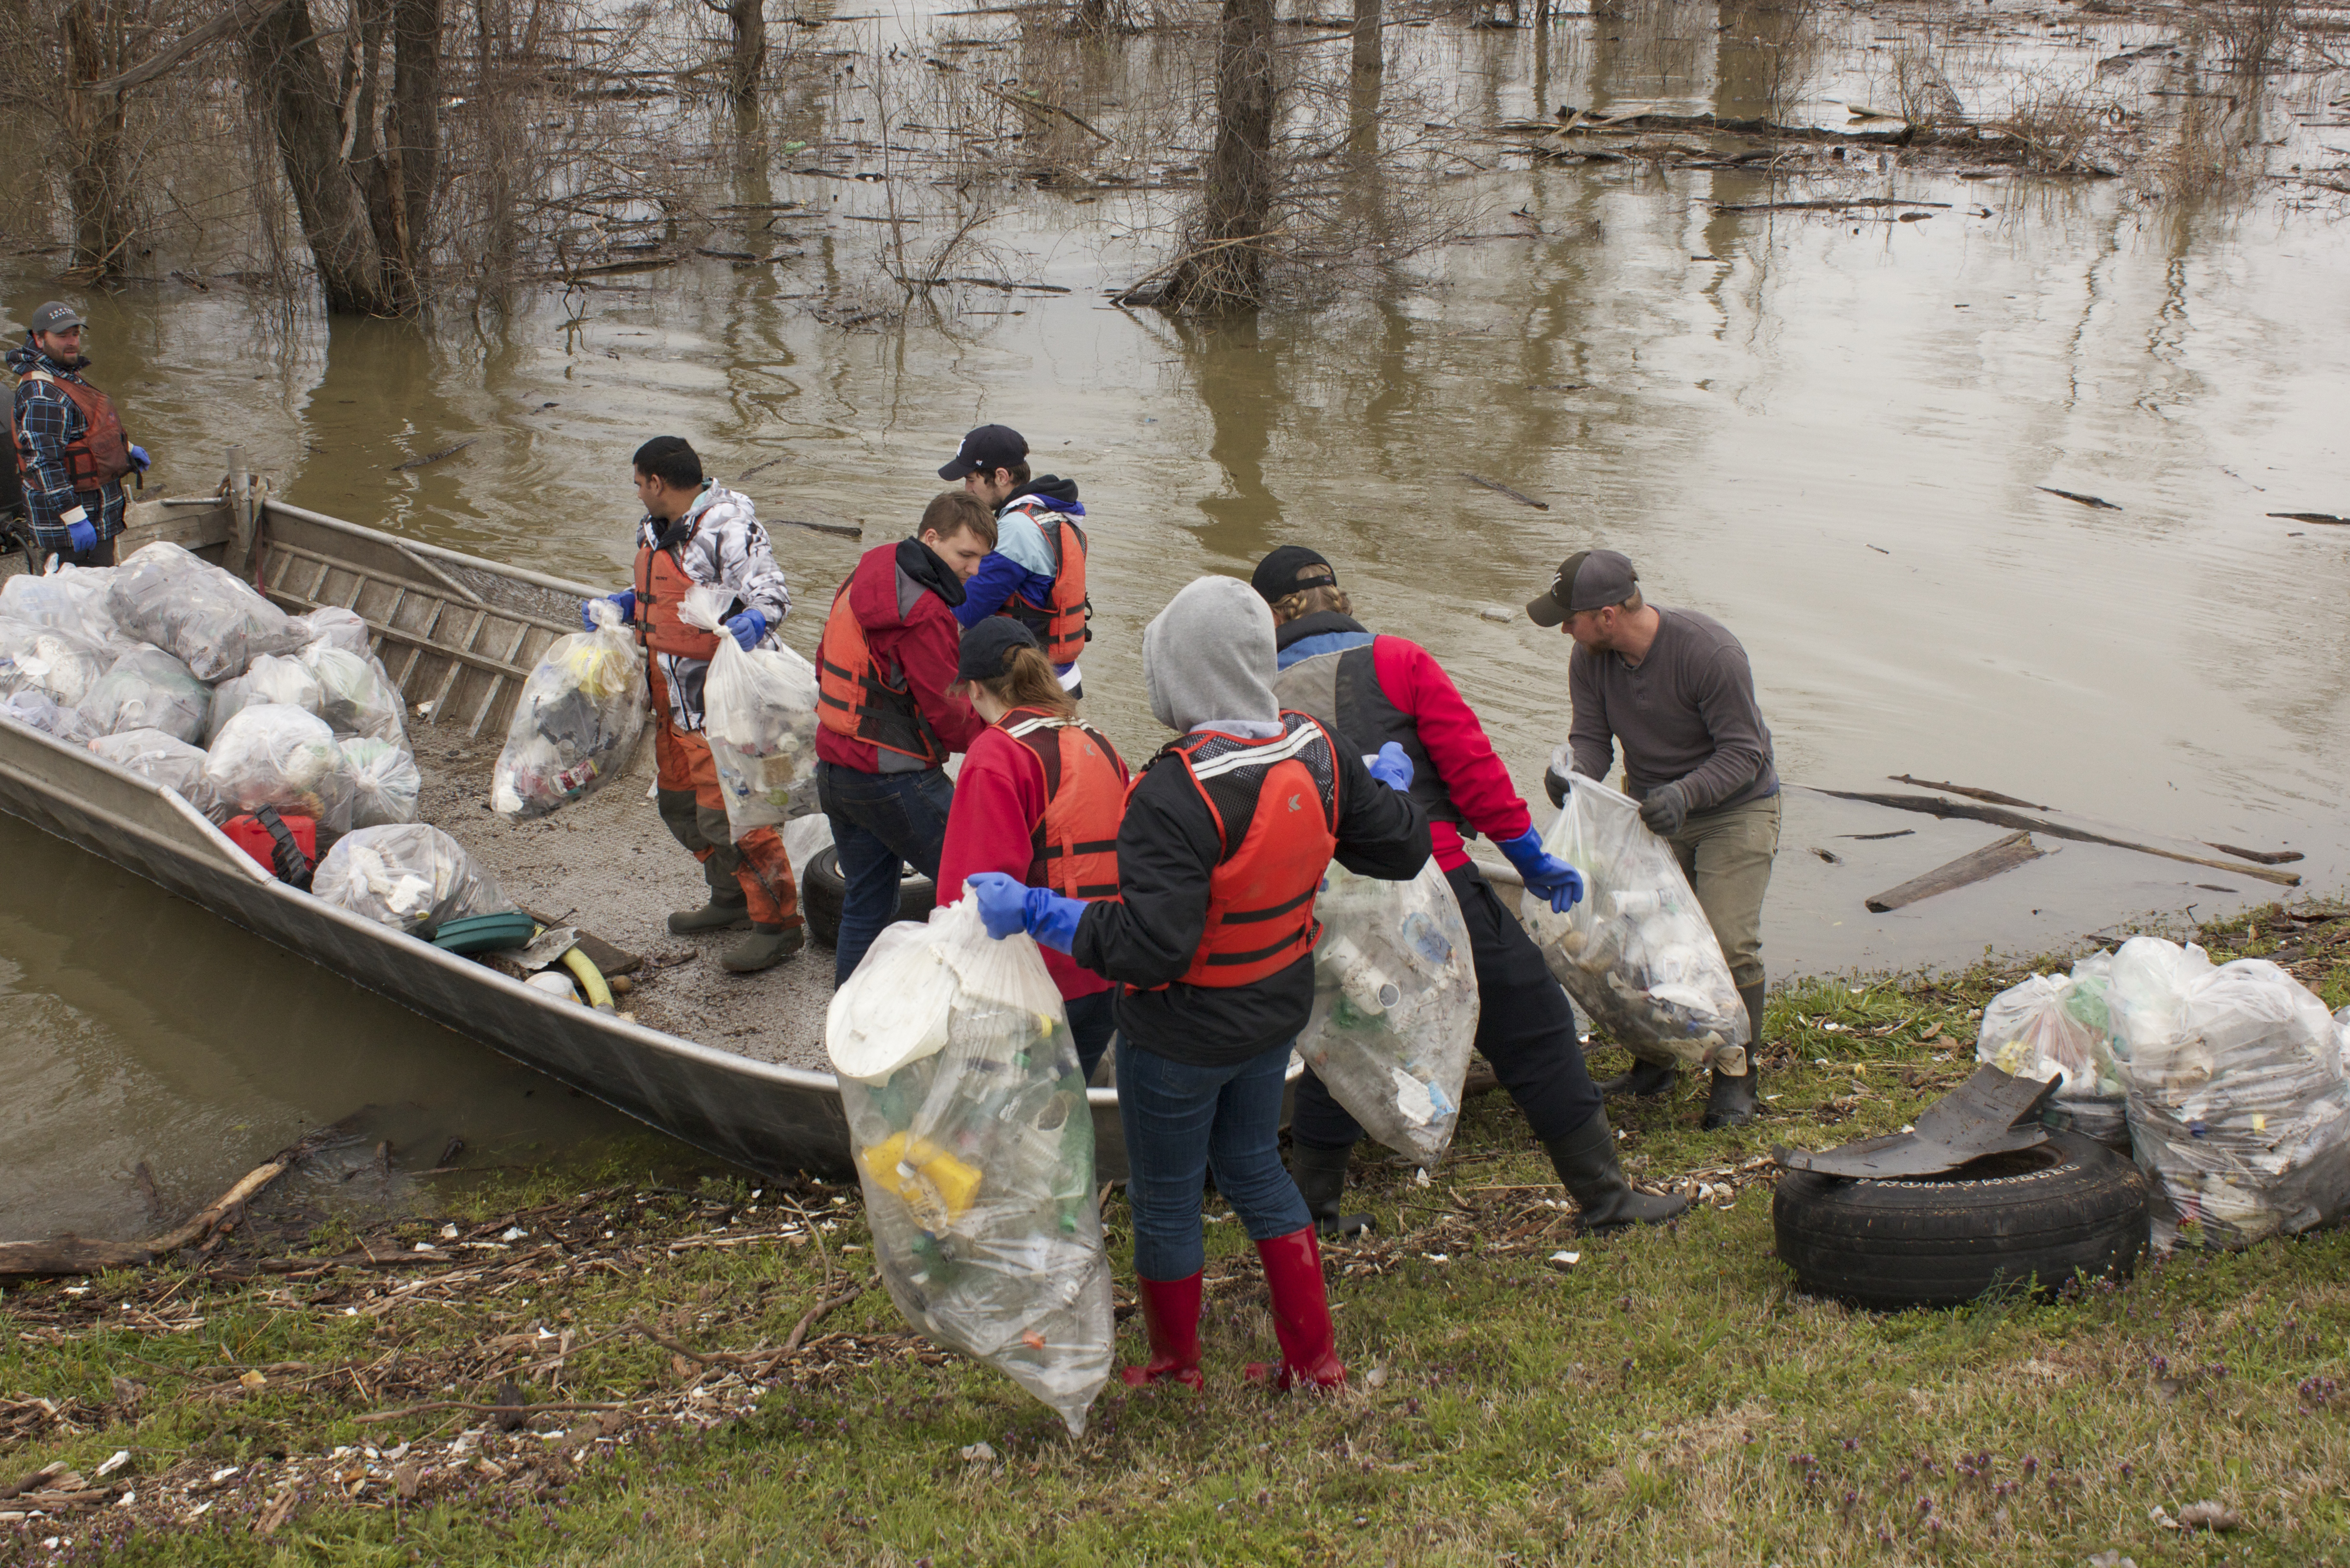 Finishing up at this site, students help load trash onto a boat that will eventually take it to the landfill.